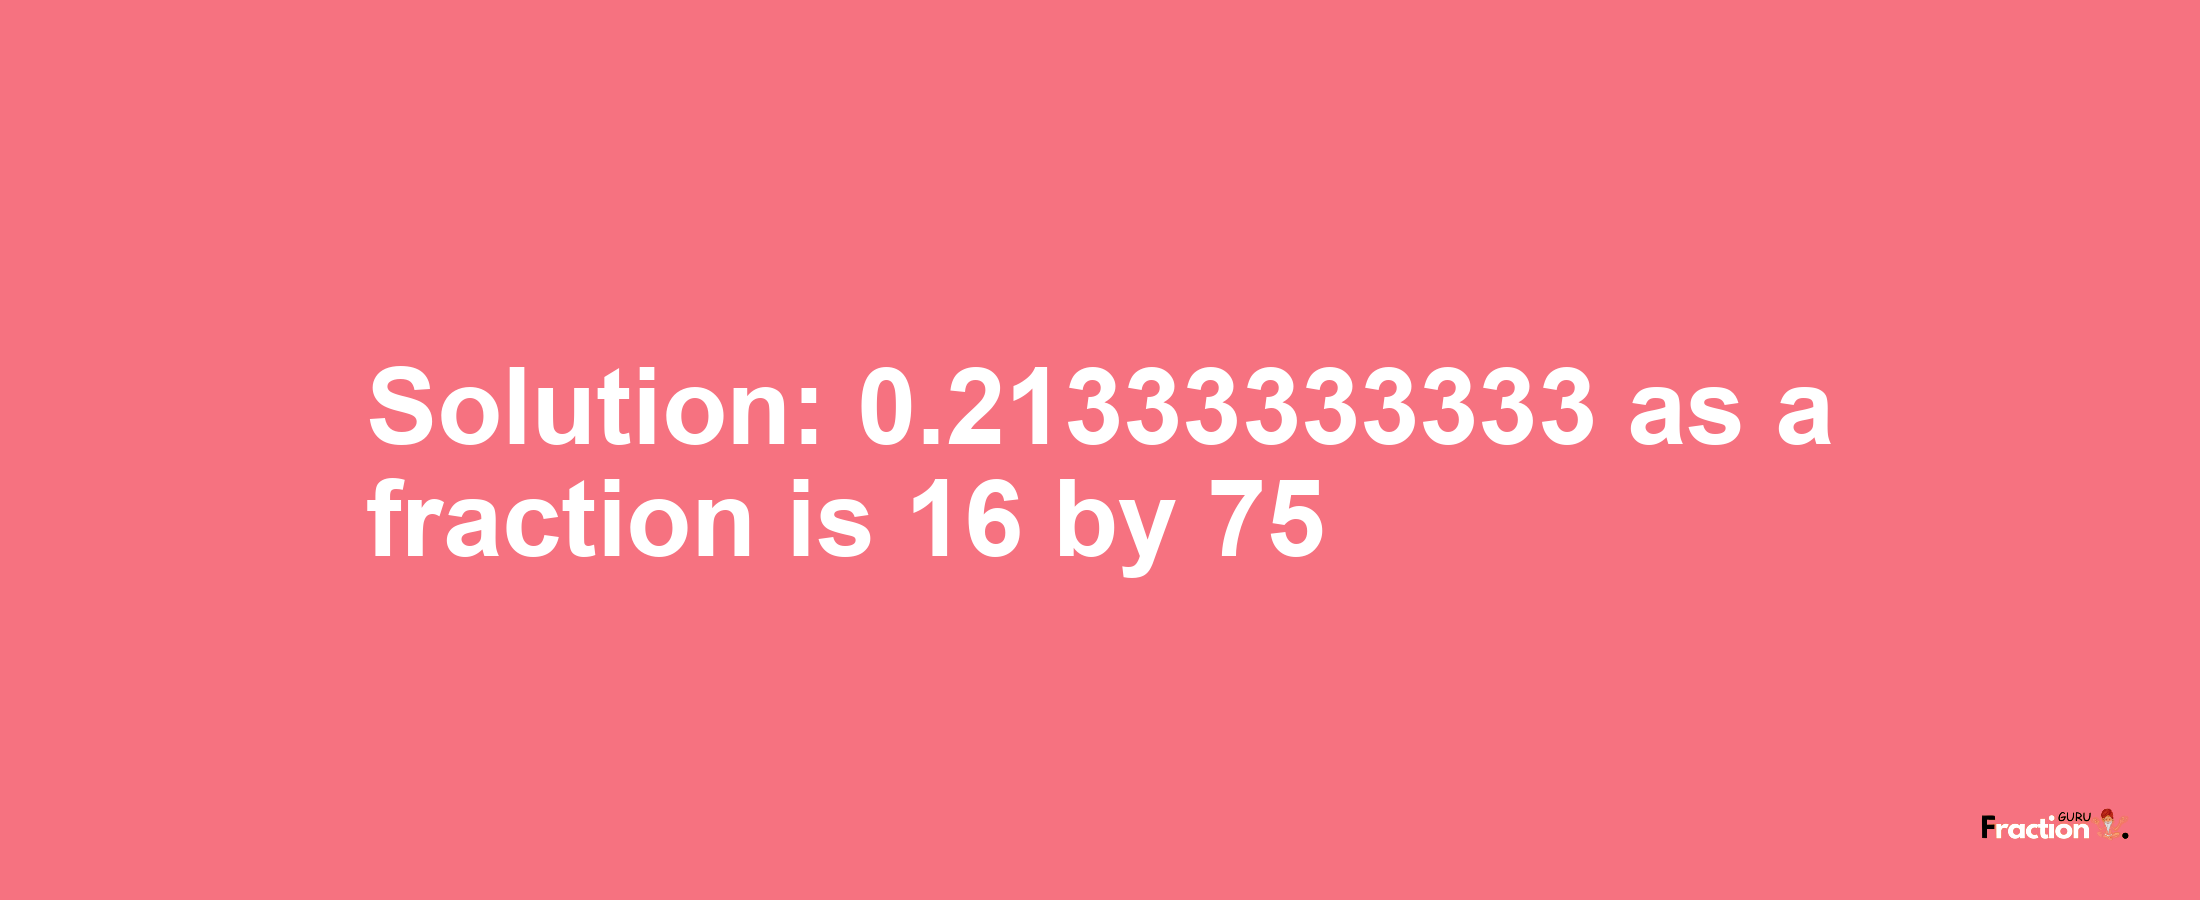 Solution:0.21333333333 as a fraction is 16/75